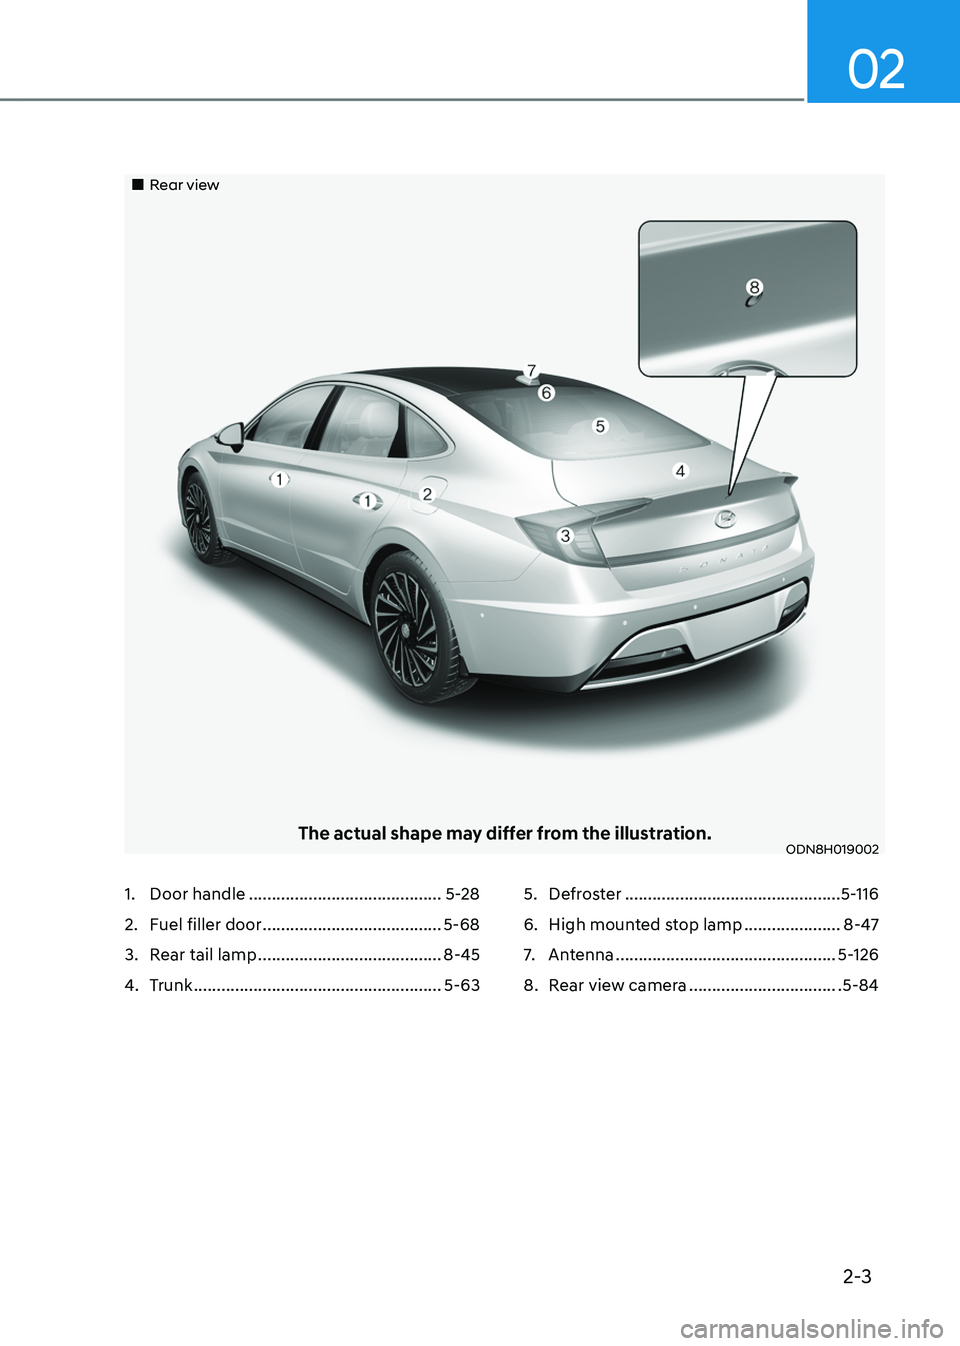 HYUNDAI SONATA HYBRID 2022 Owners Guide 2-3
02
„„Rear view
The actual shape may differ from the illustration.ODN8H019002
1. Door handle ..........................................5-28
2. Fuel filler door ...........................